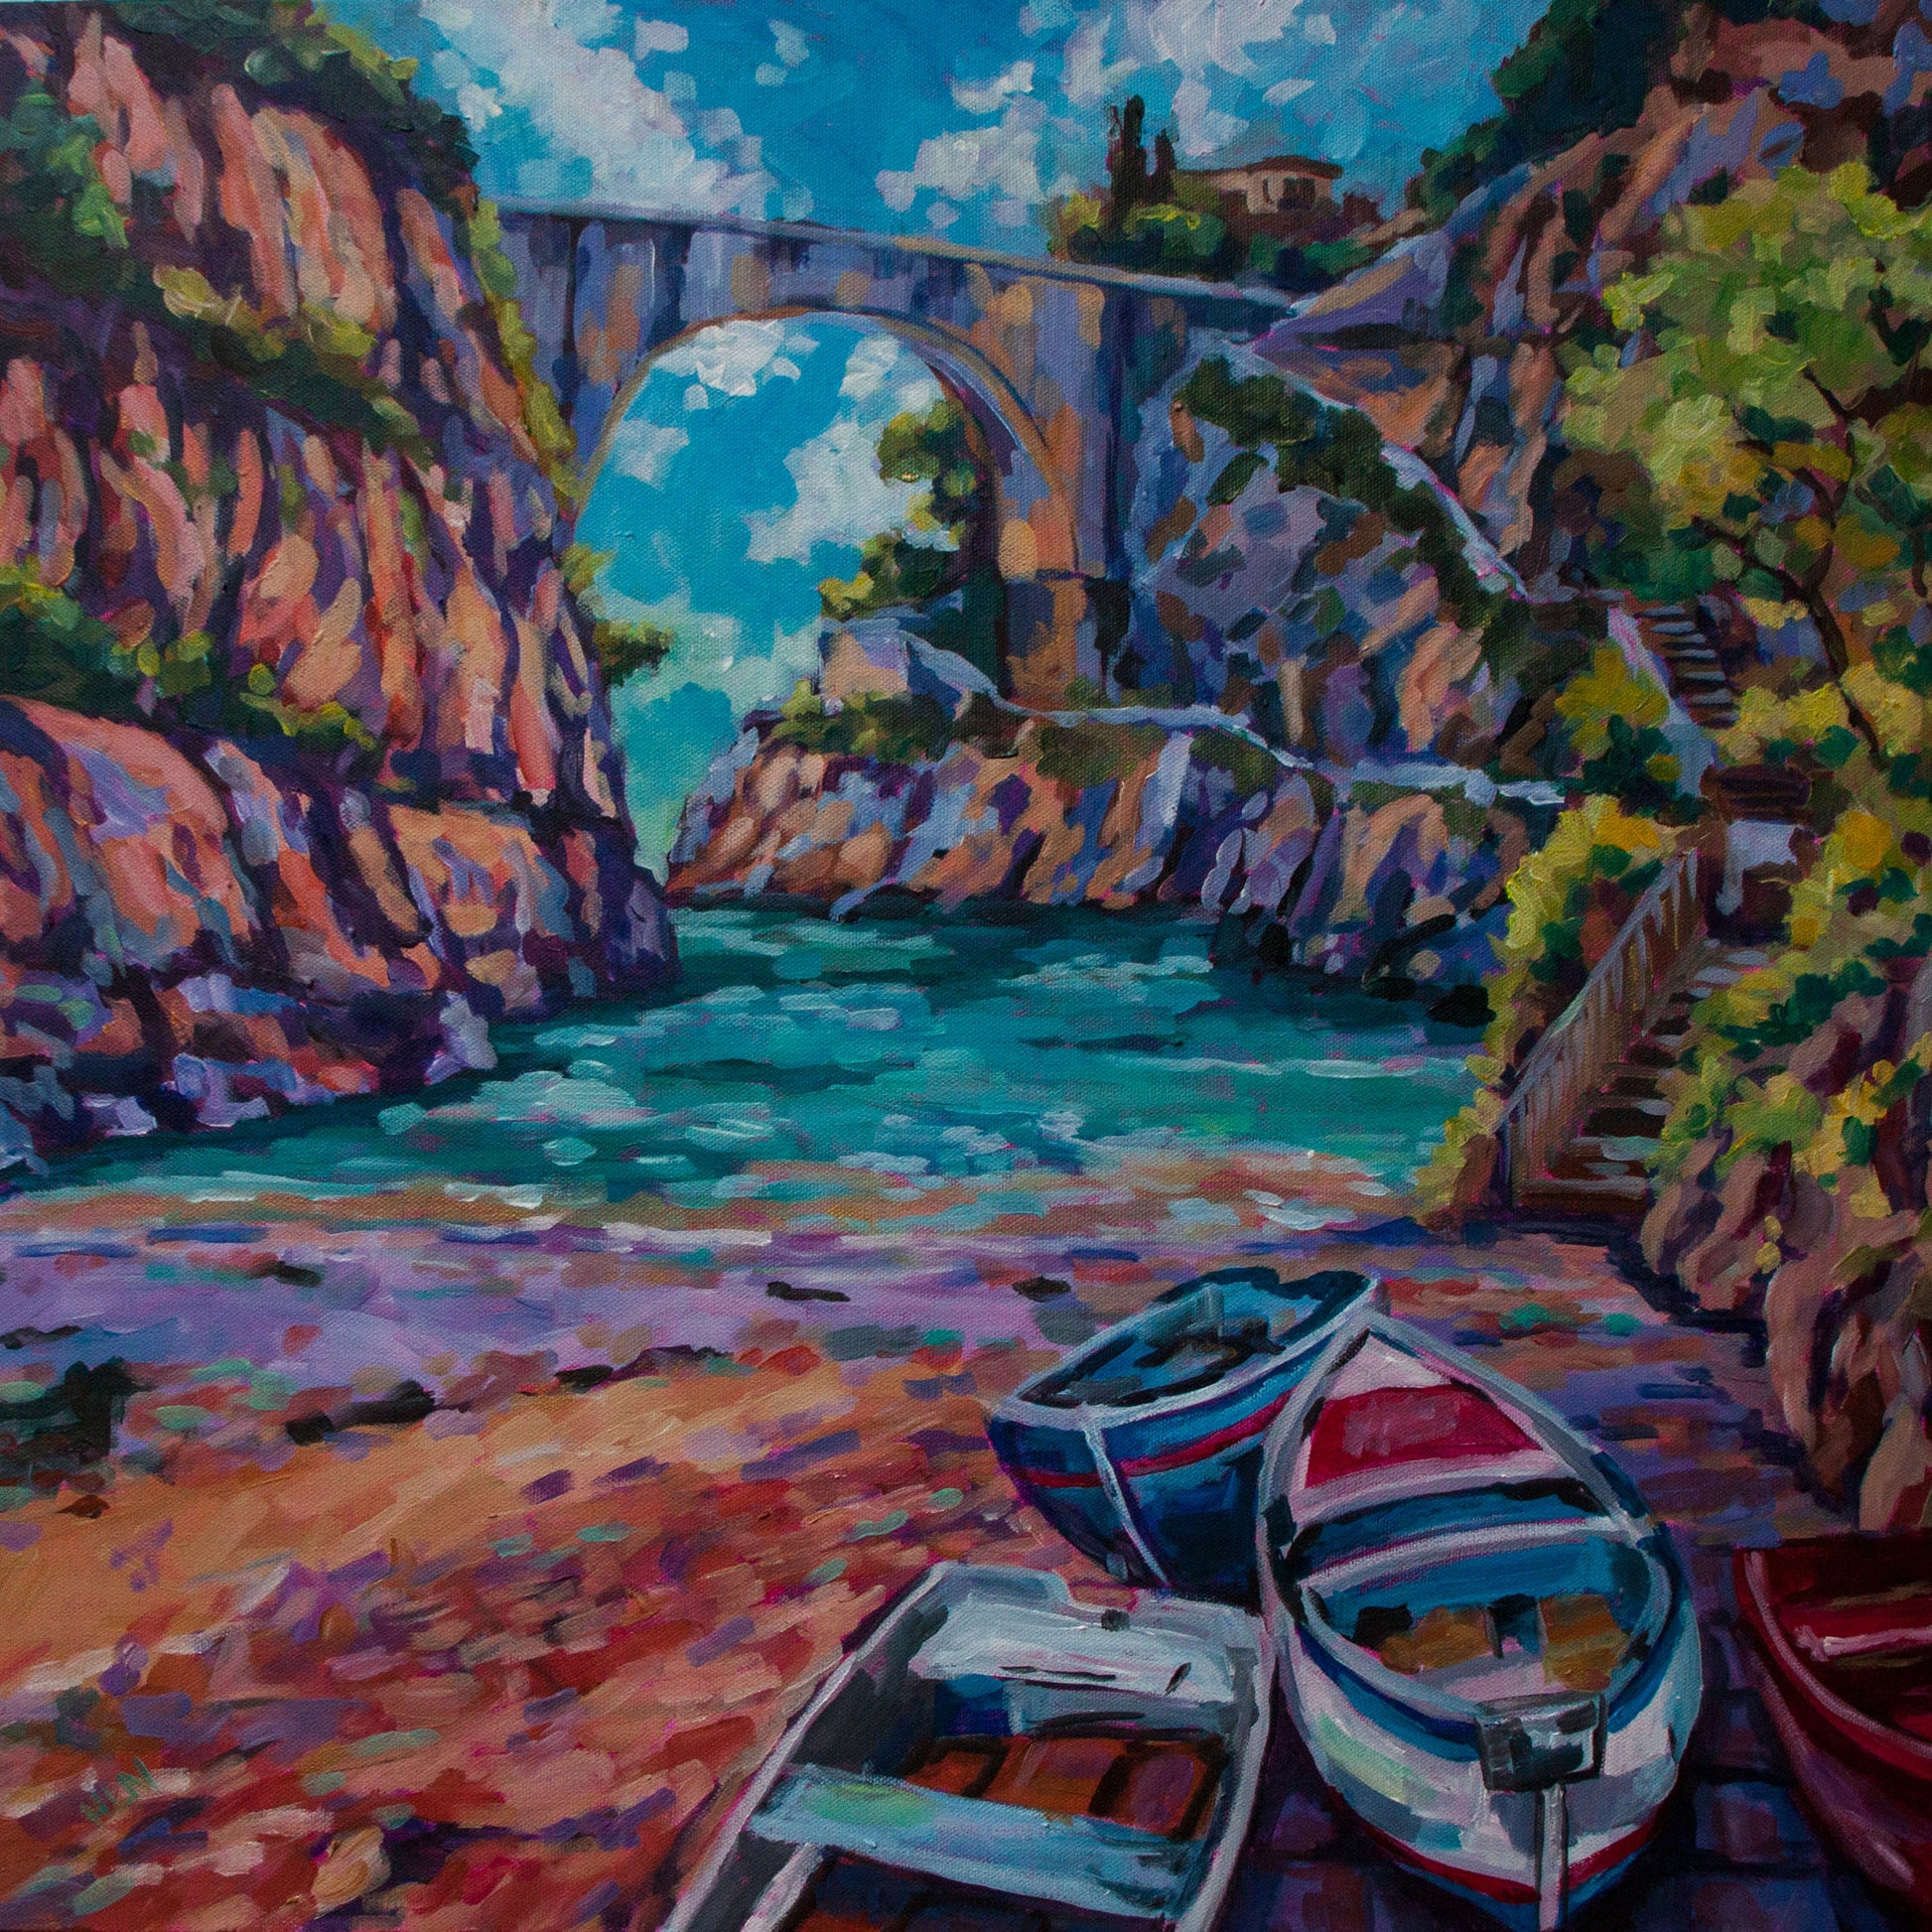 Painting of the Amalfi Coast of italy of the Fiordo Di Furor with the bridge and boats